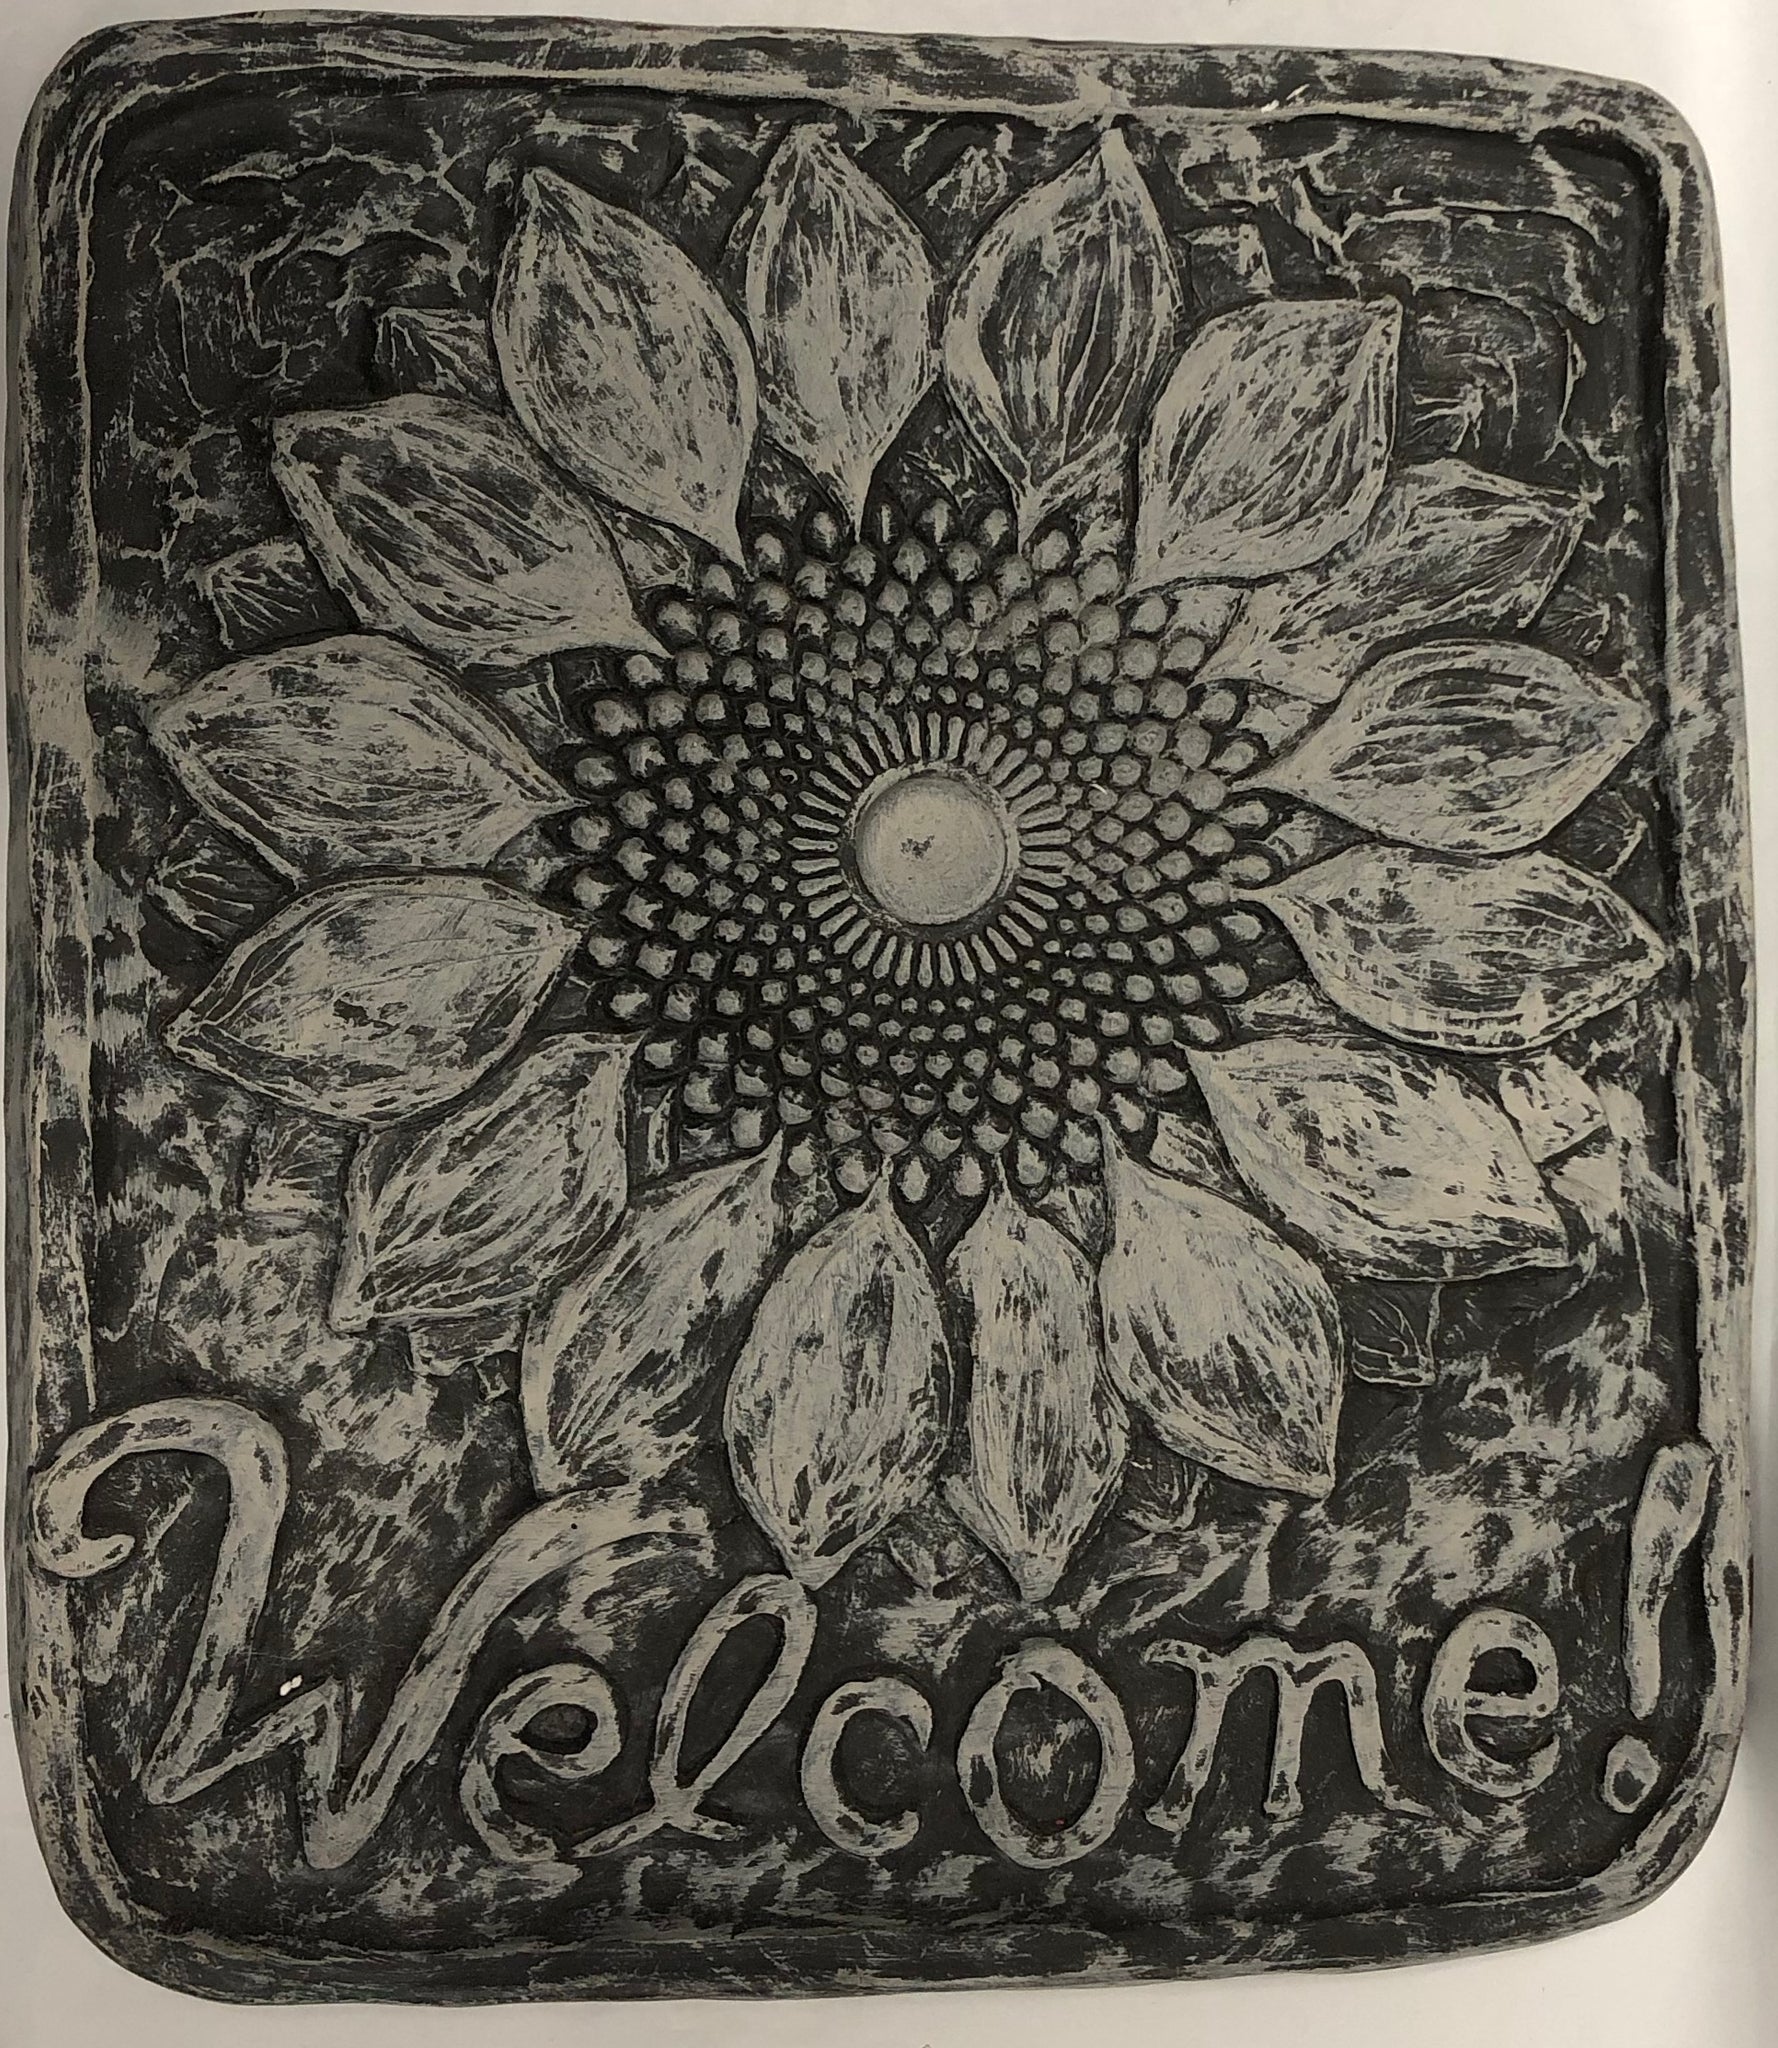 Large Sunflower Welcome Stepping Stone